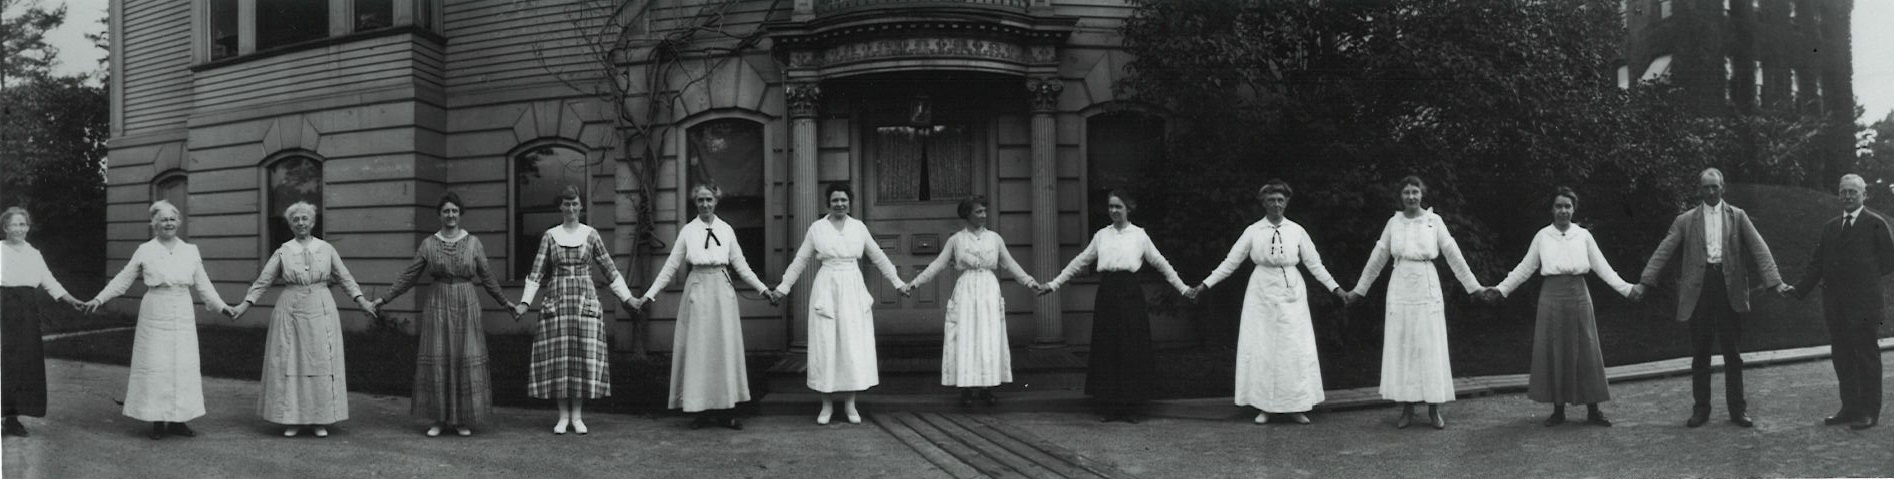 1918 black-and-white photograph of the Harvard "computers" holding hands and standing in a line like paperdolls.